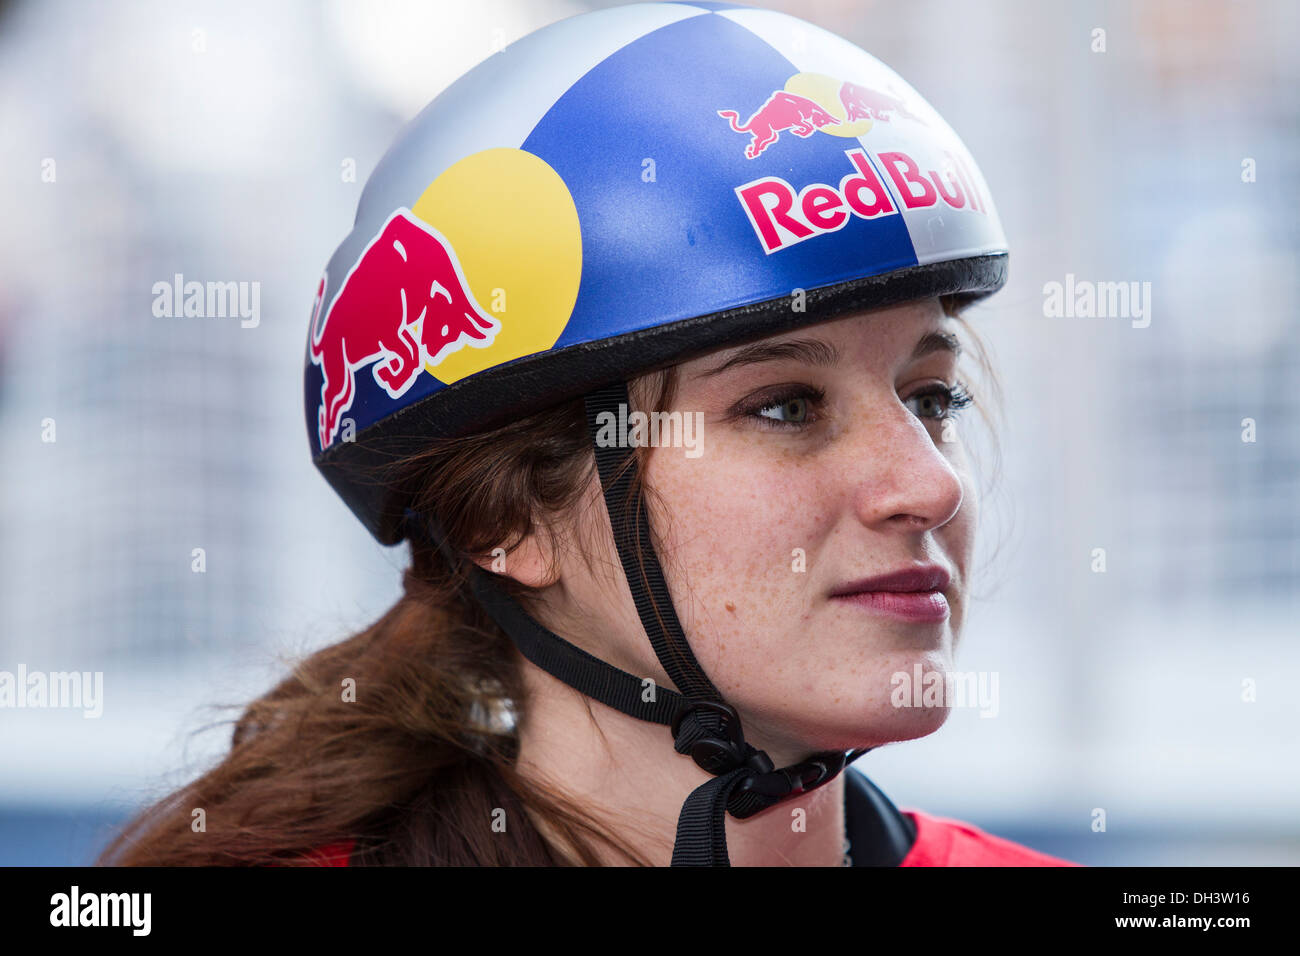 Katherine Reutter at the USOC 100 Day Countdown to the Sochi 2014 Olympic Winter Games Stock Photo